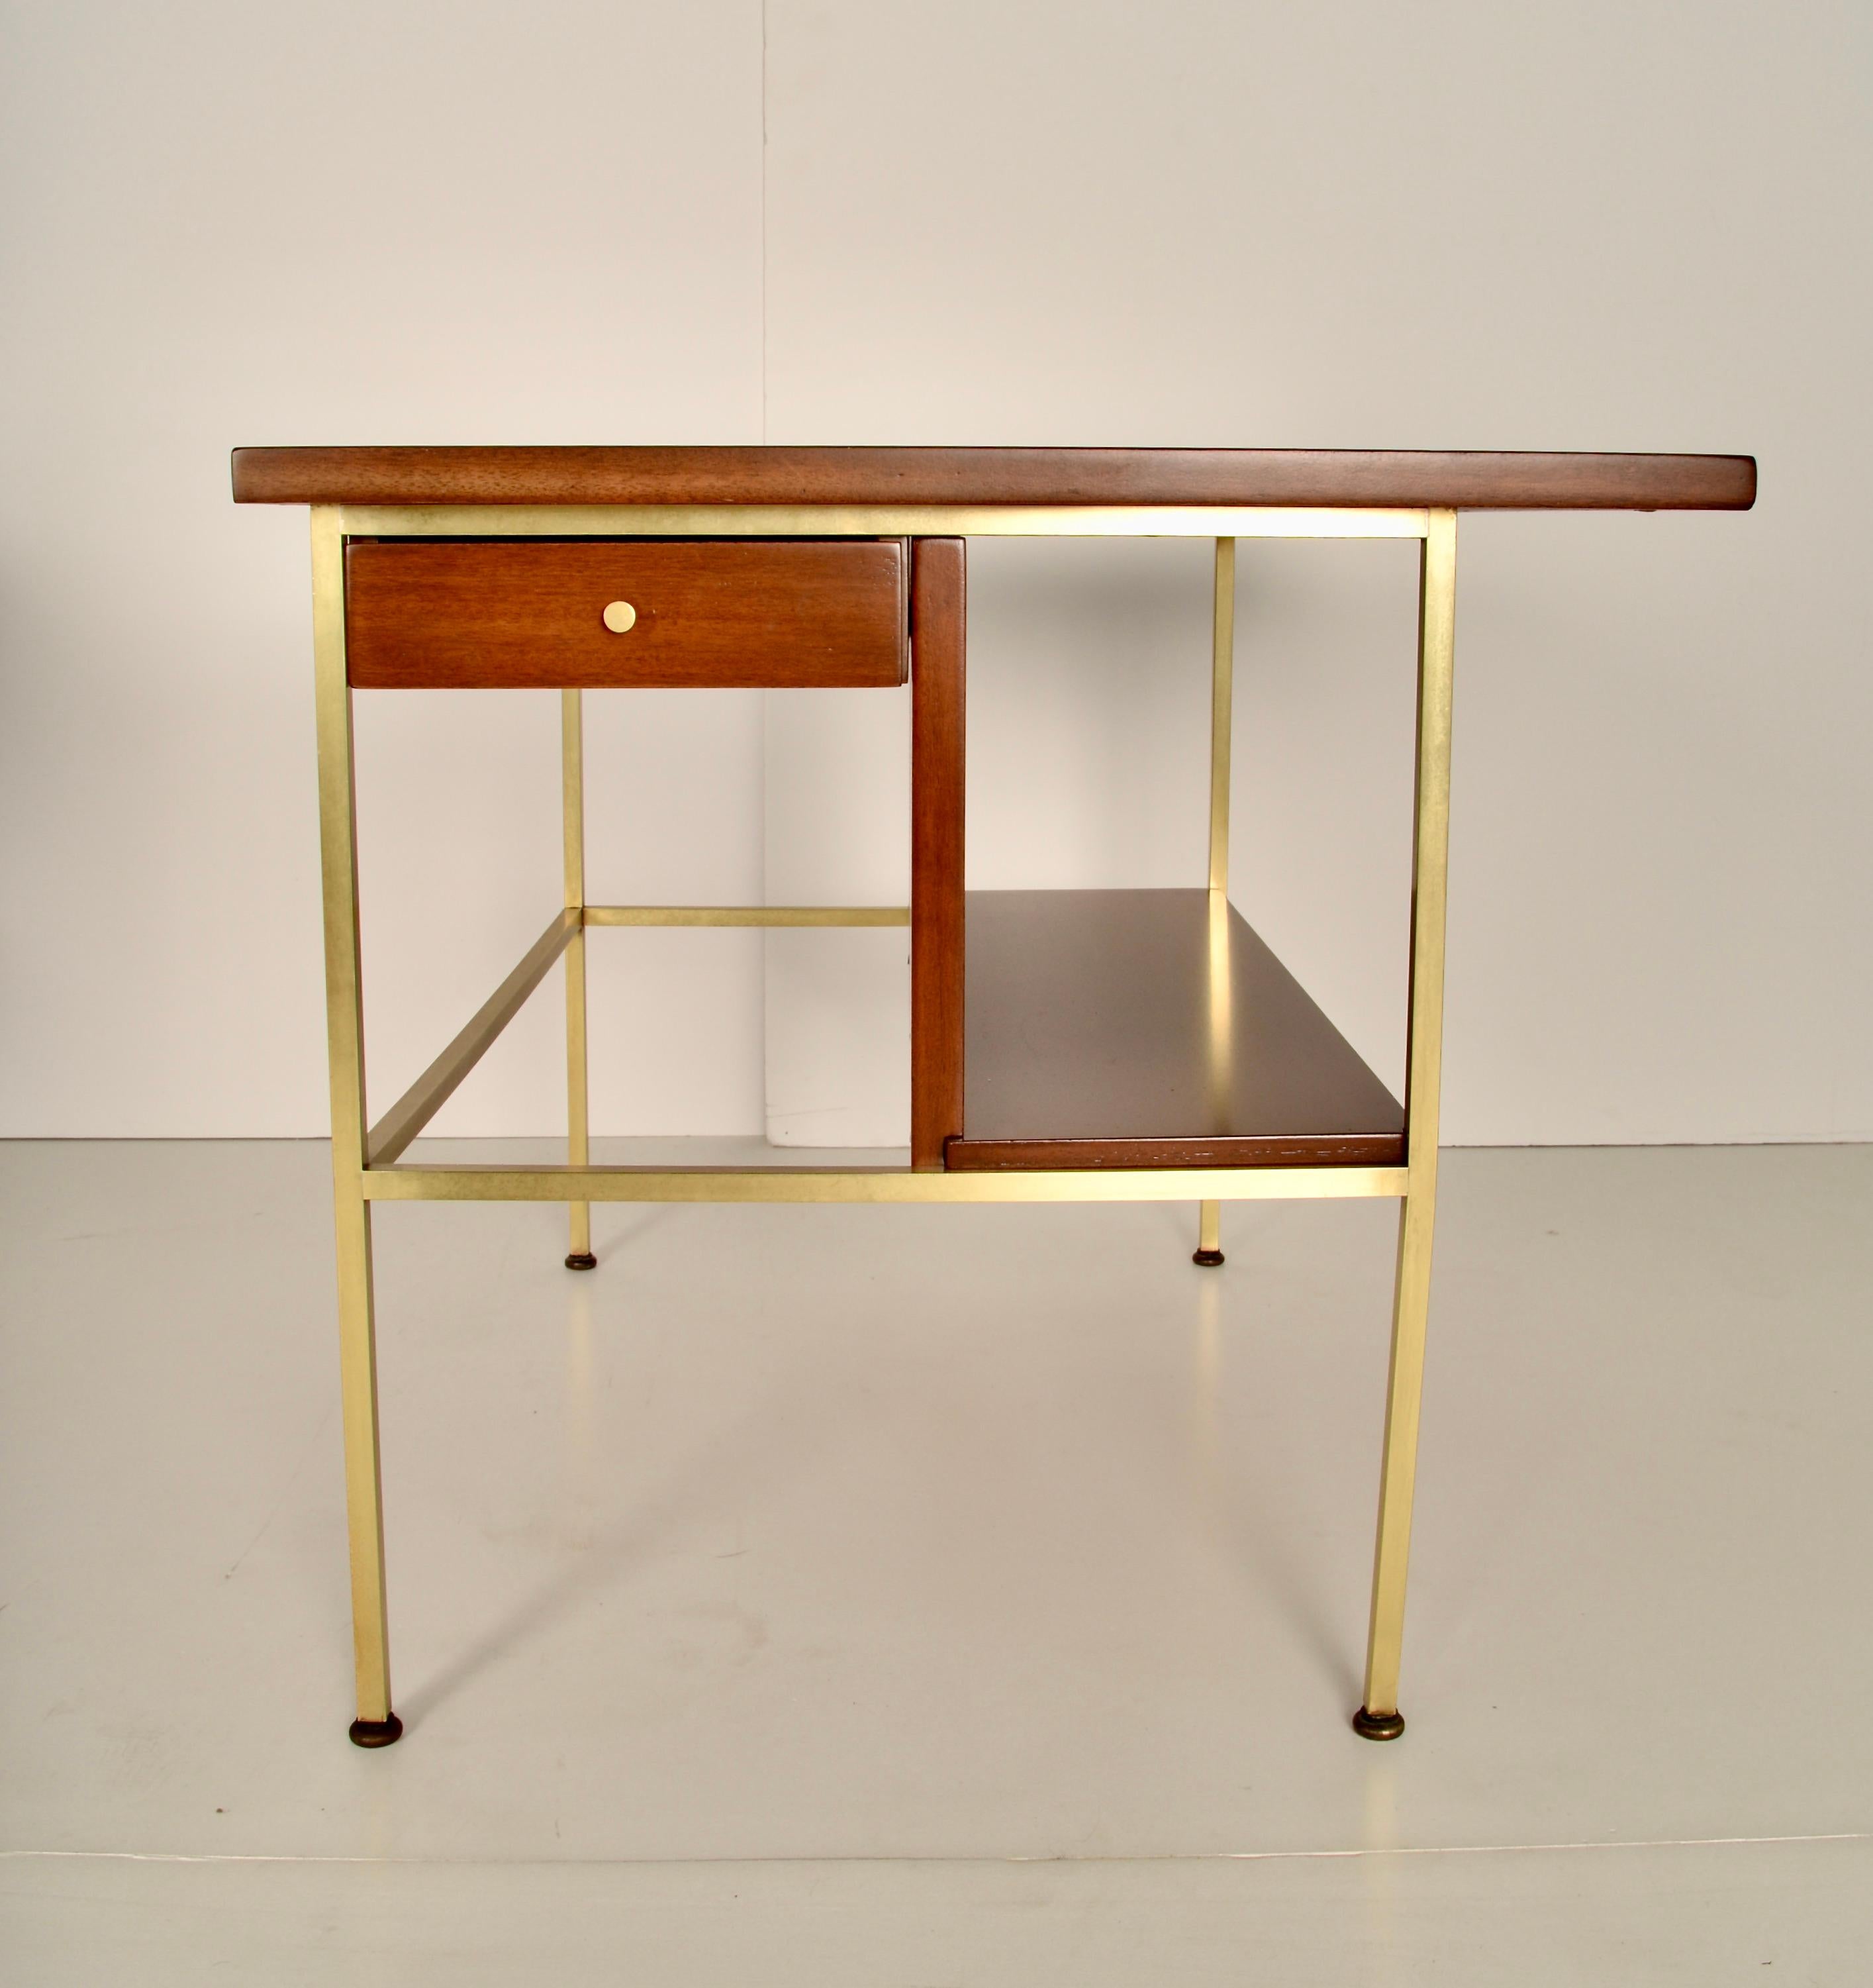 A fine pair of side tables from the Irwin Collection, designed by Paul McCobb for Calvin Furniture in the 1950s. Each of the tables features a single drawer and an open shelf in walnut, along with signature brass legs. These tables have been fully